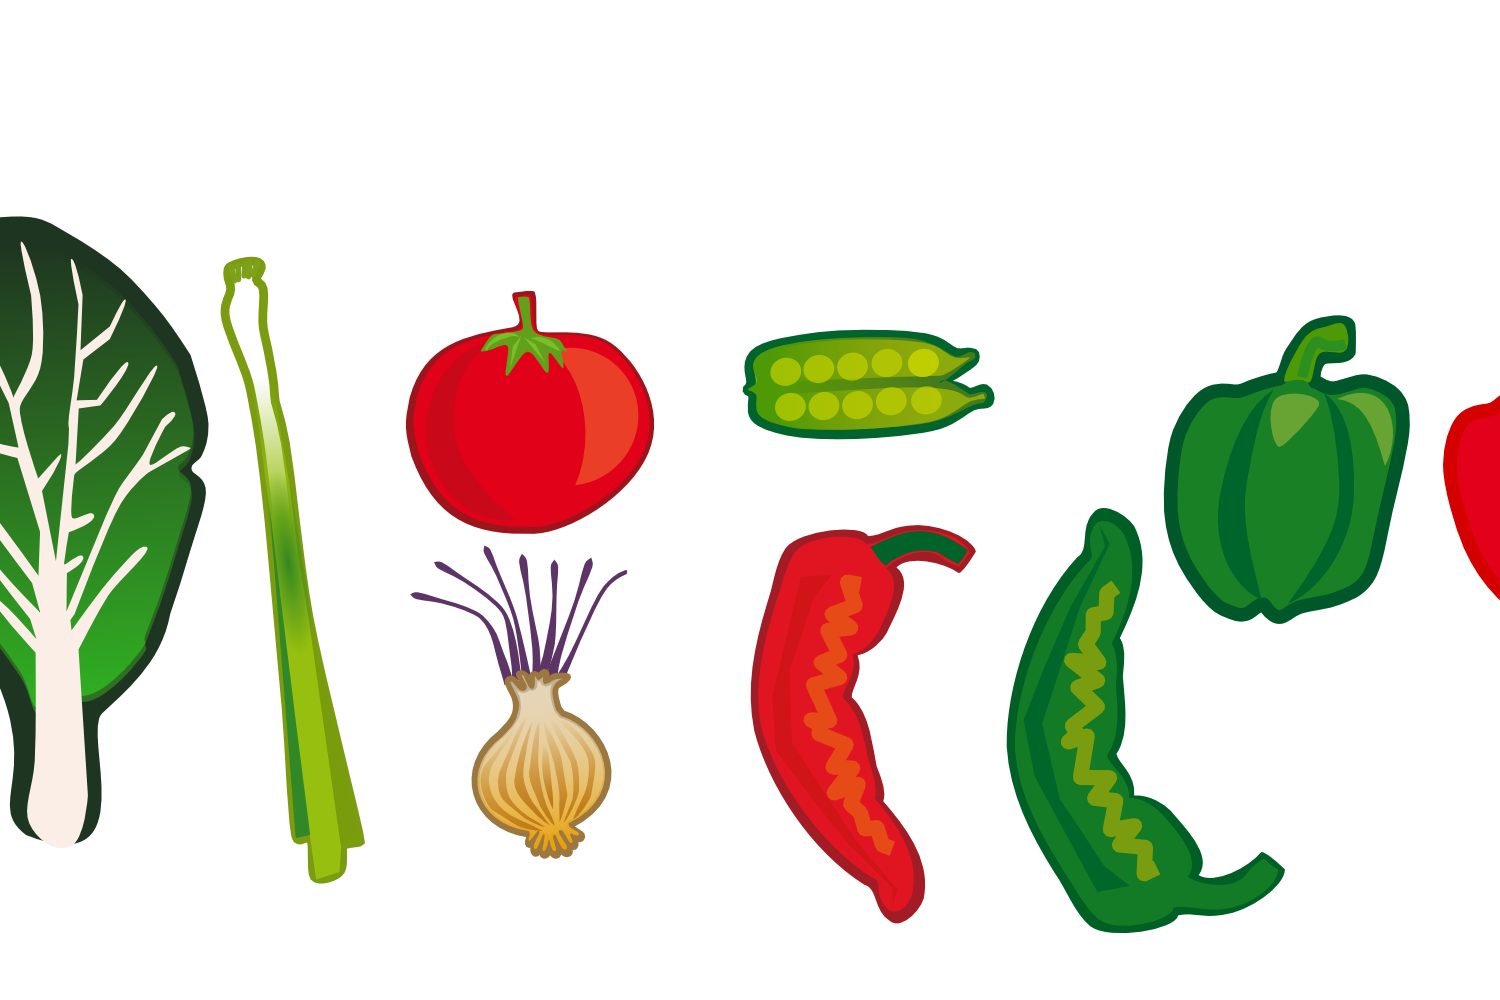 Gardening clipart vegetable patch, Gardening vegetable patch